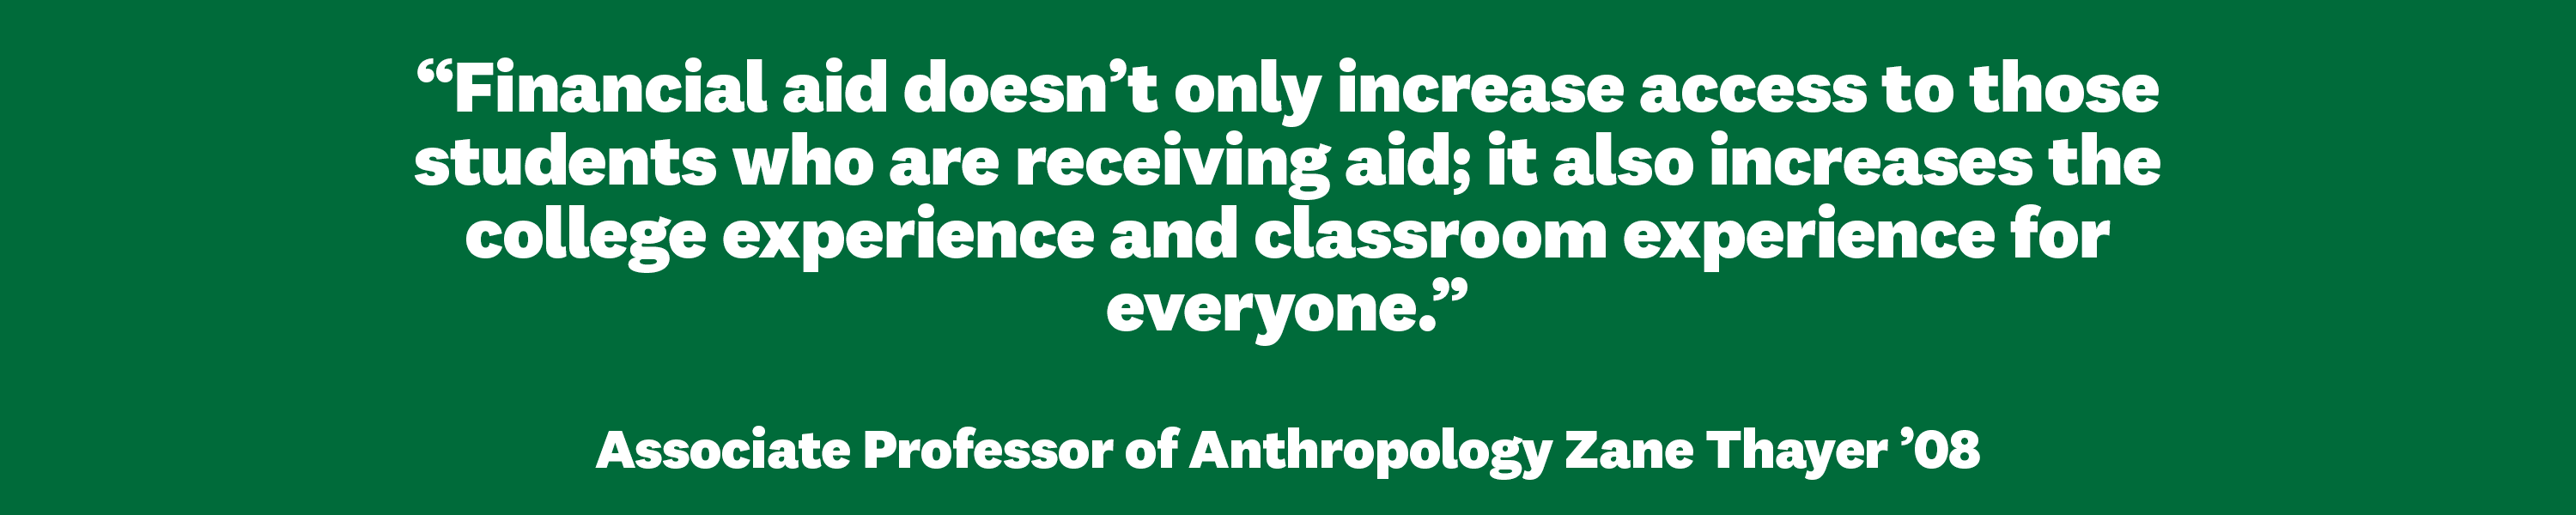 “Financial aid doesn’t only increase access to those students who are receiving aid; it also increases the college experience and classroom experience  for everyone.”  Associate Professor of Anthropology Zane Thayer ’08